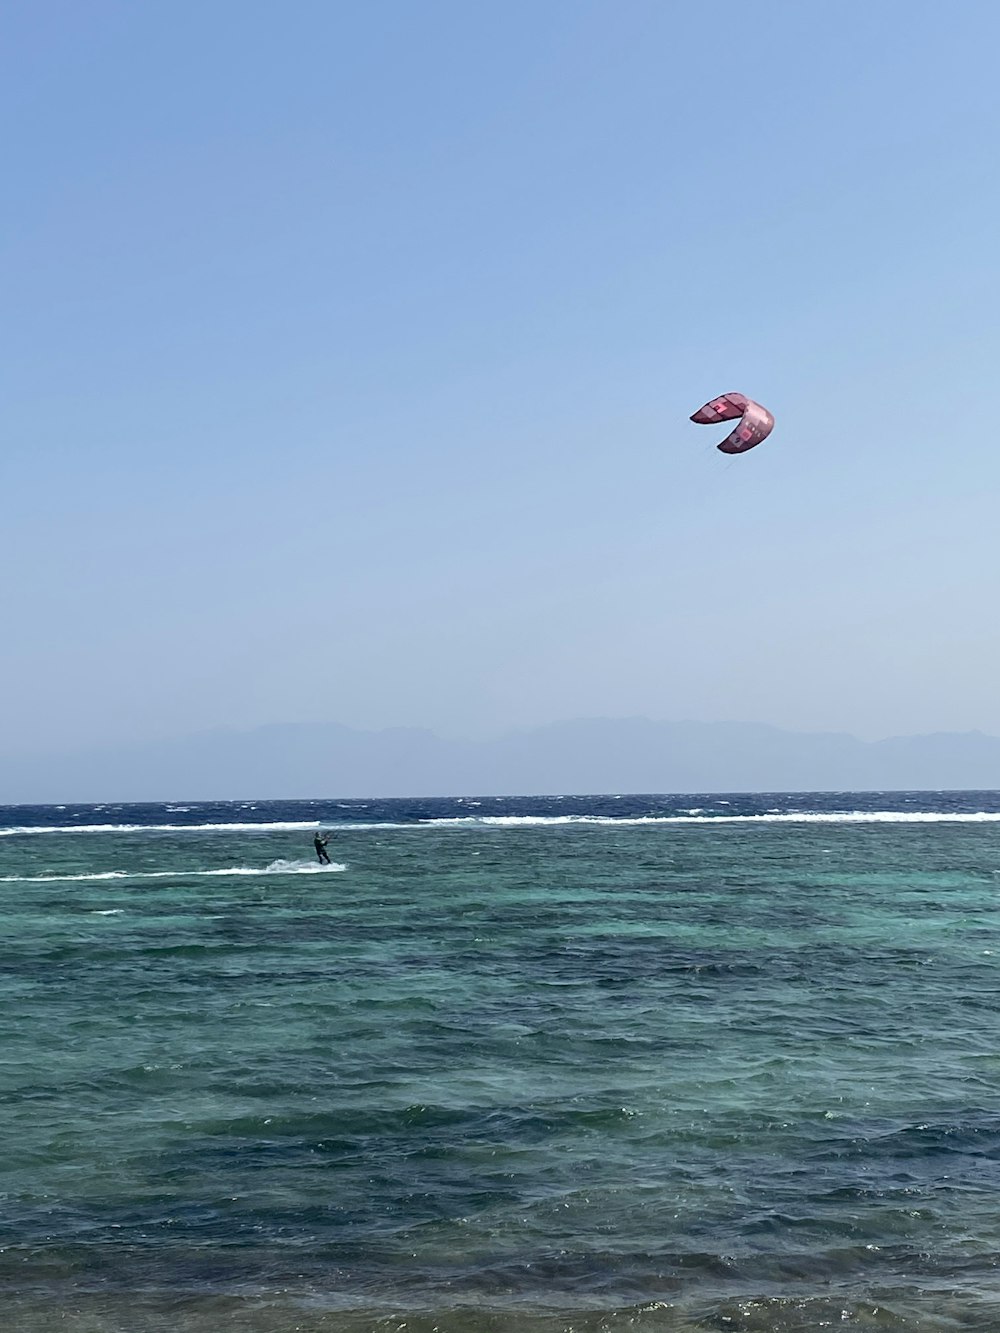 red and white kite surfing on sea during daytime